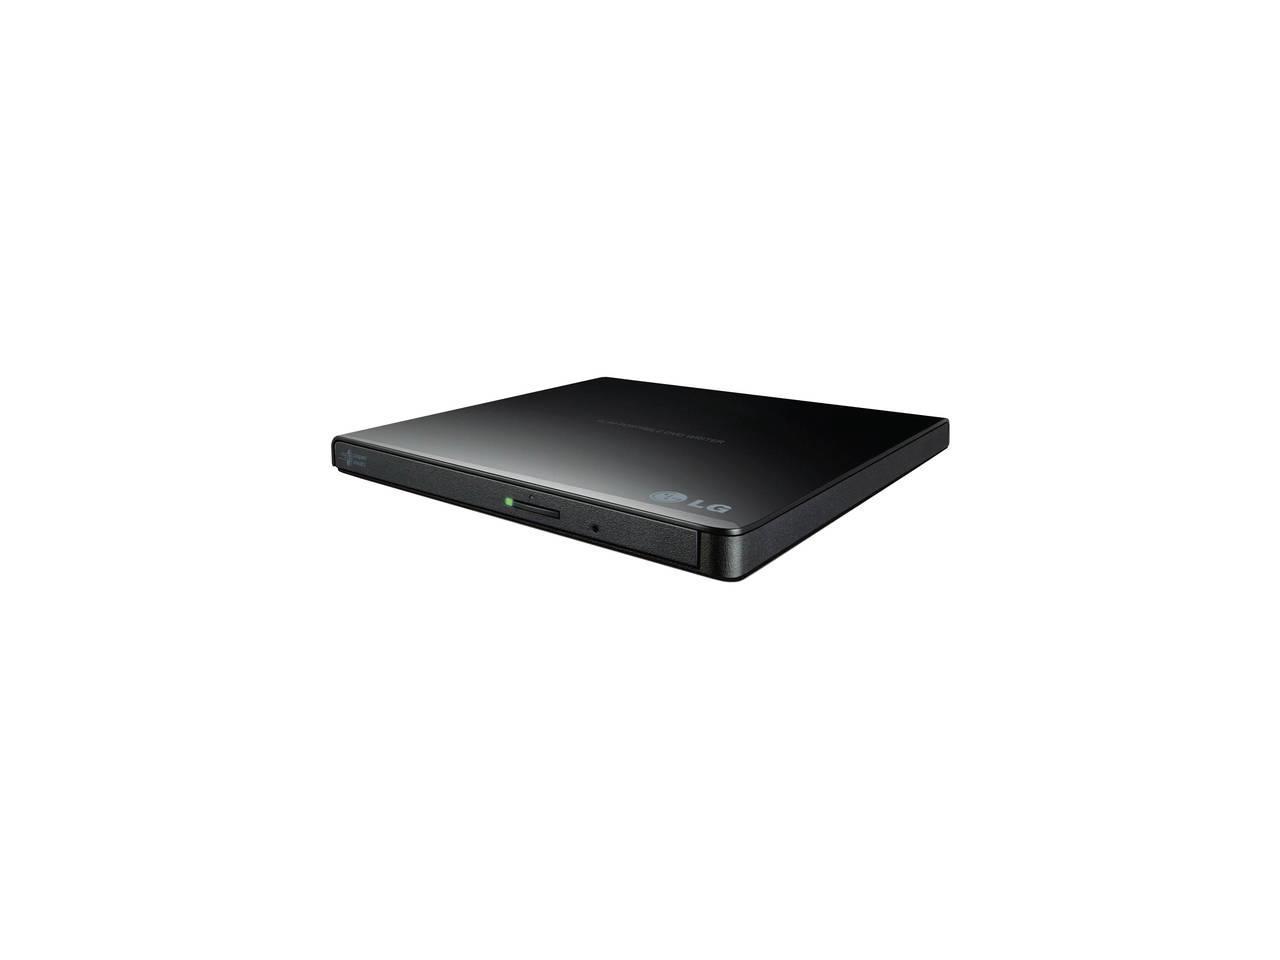 LG External CD / DVD Rewriter With M-Disc Mac & Surface Support (Gold) - Model GP65NG60